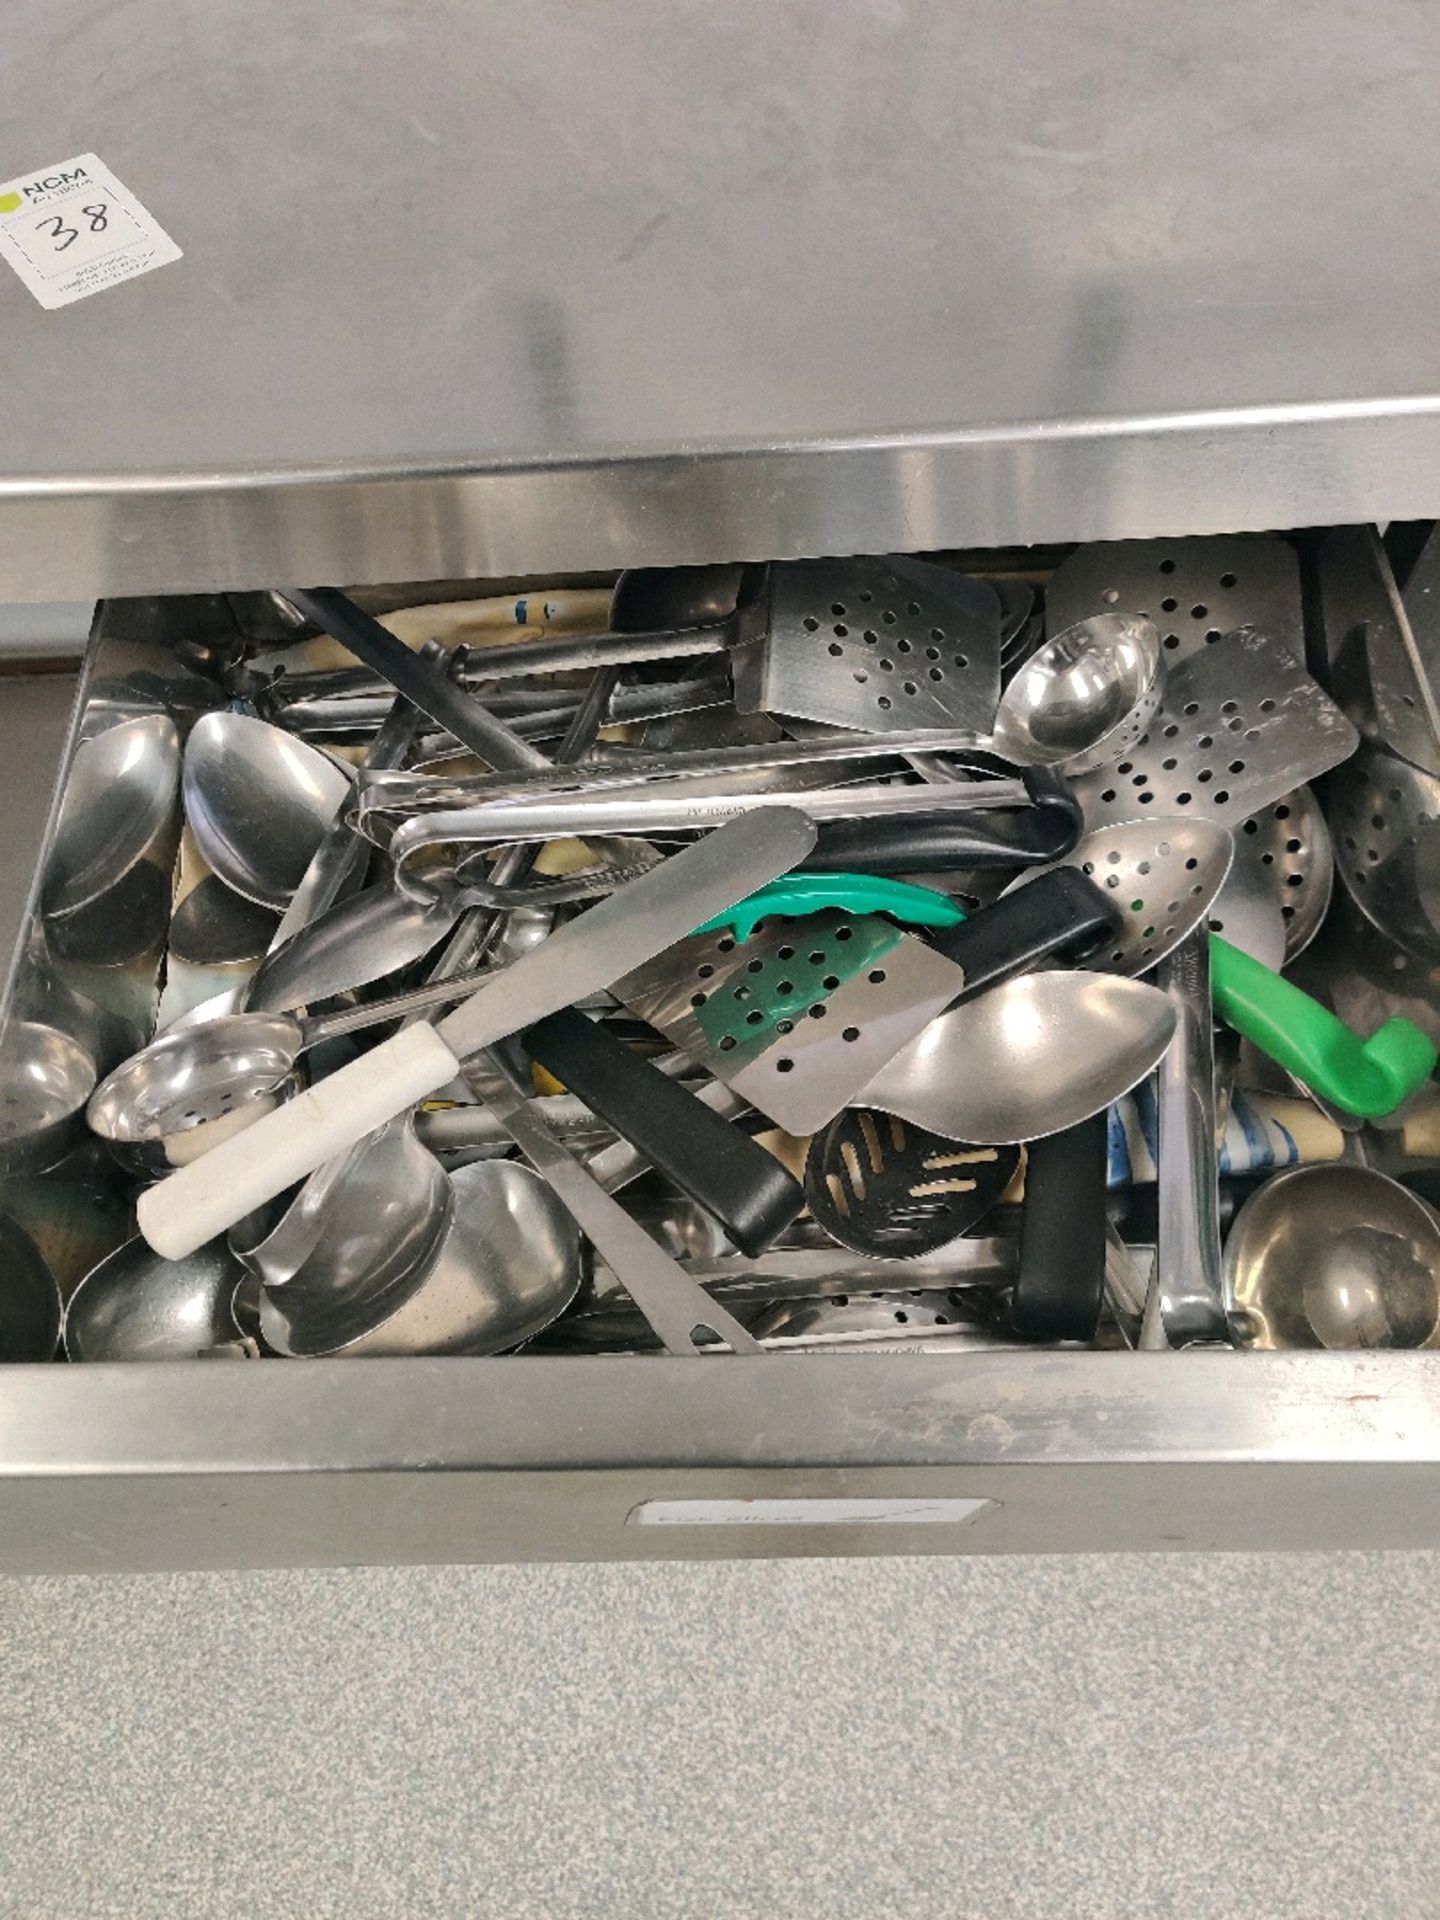 Stainless steel prep station with drawer - Image 2 of 3